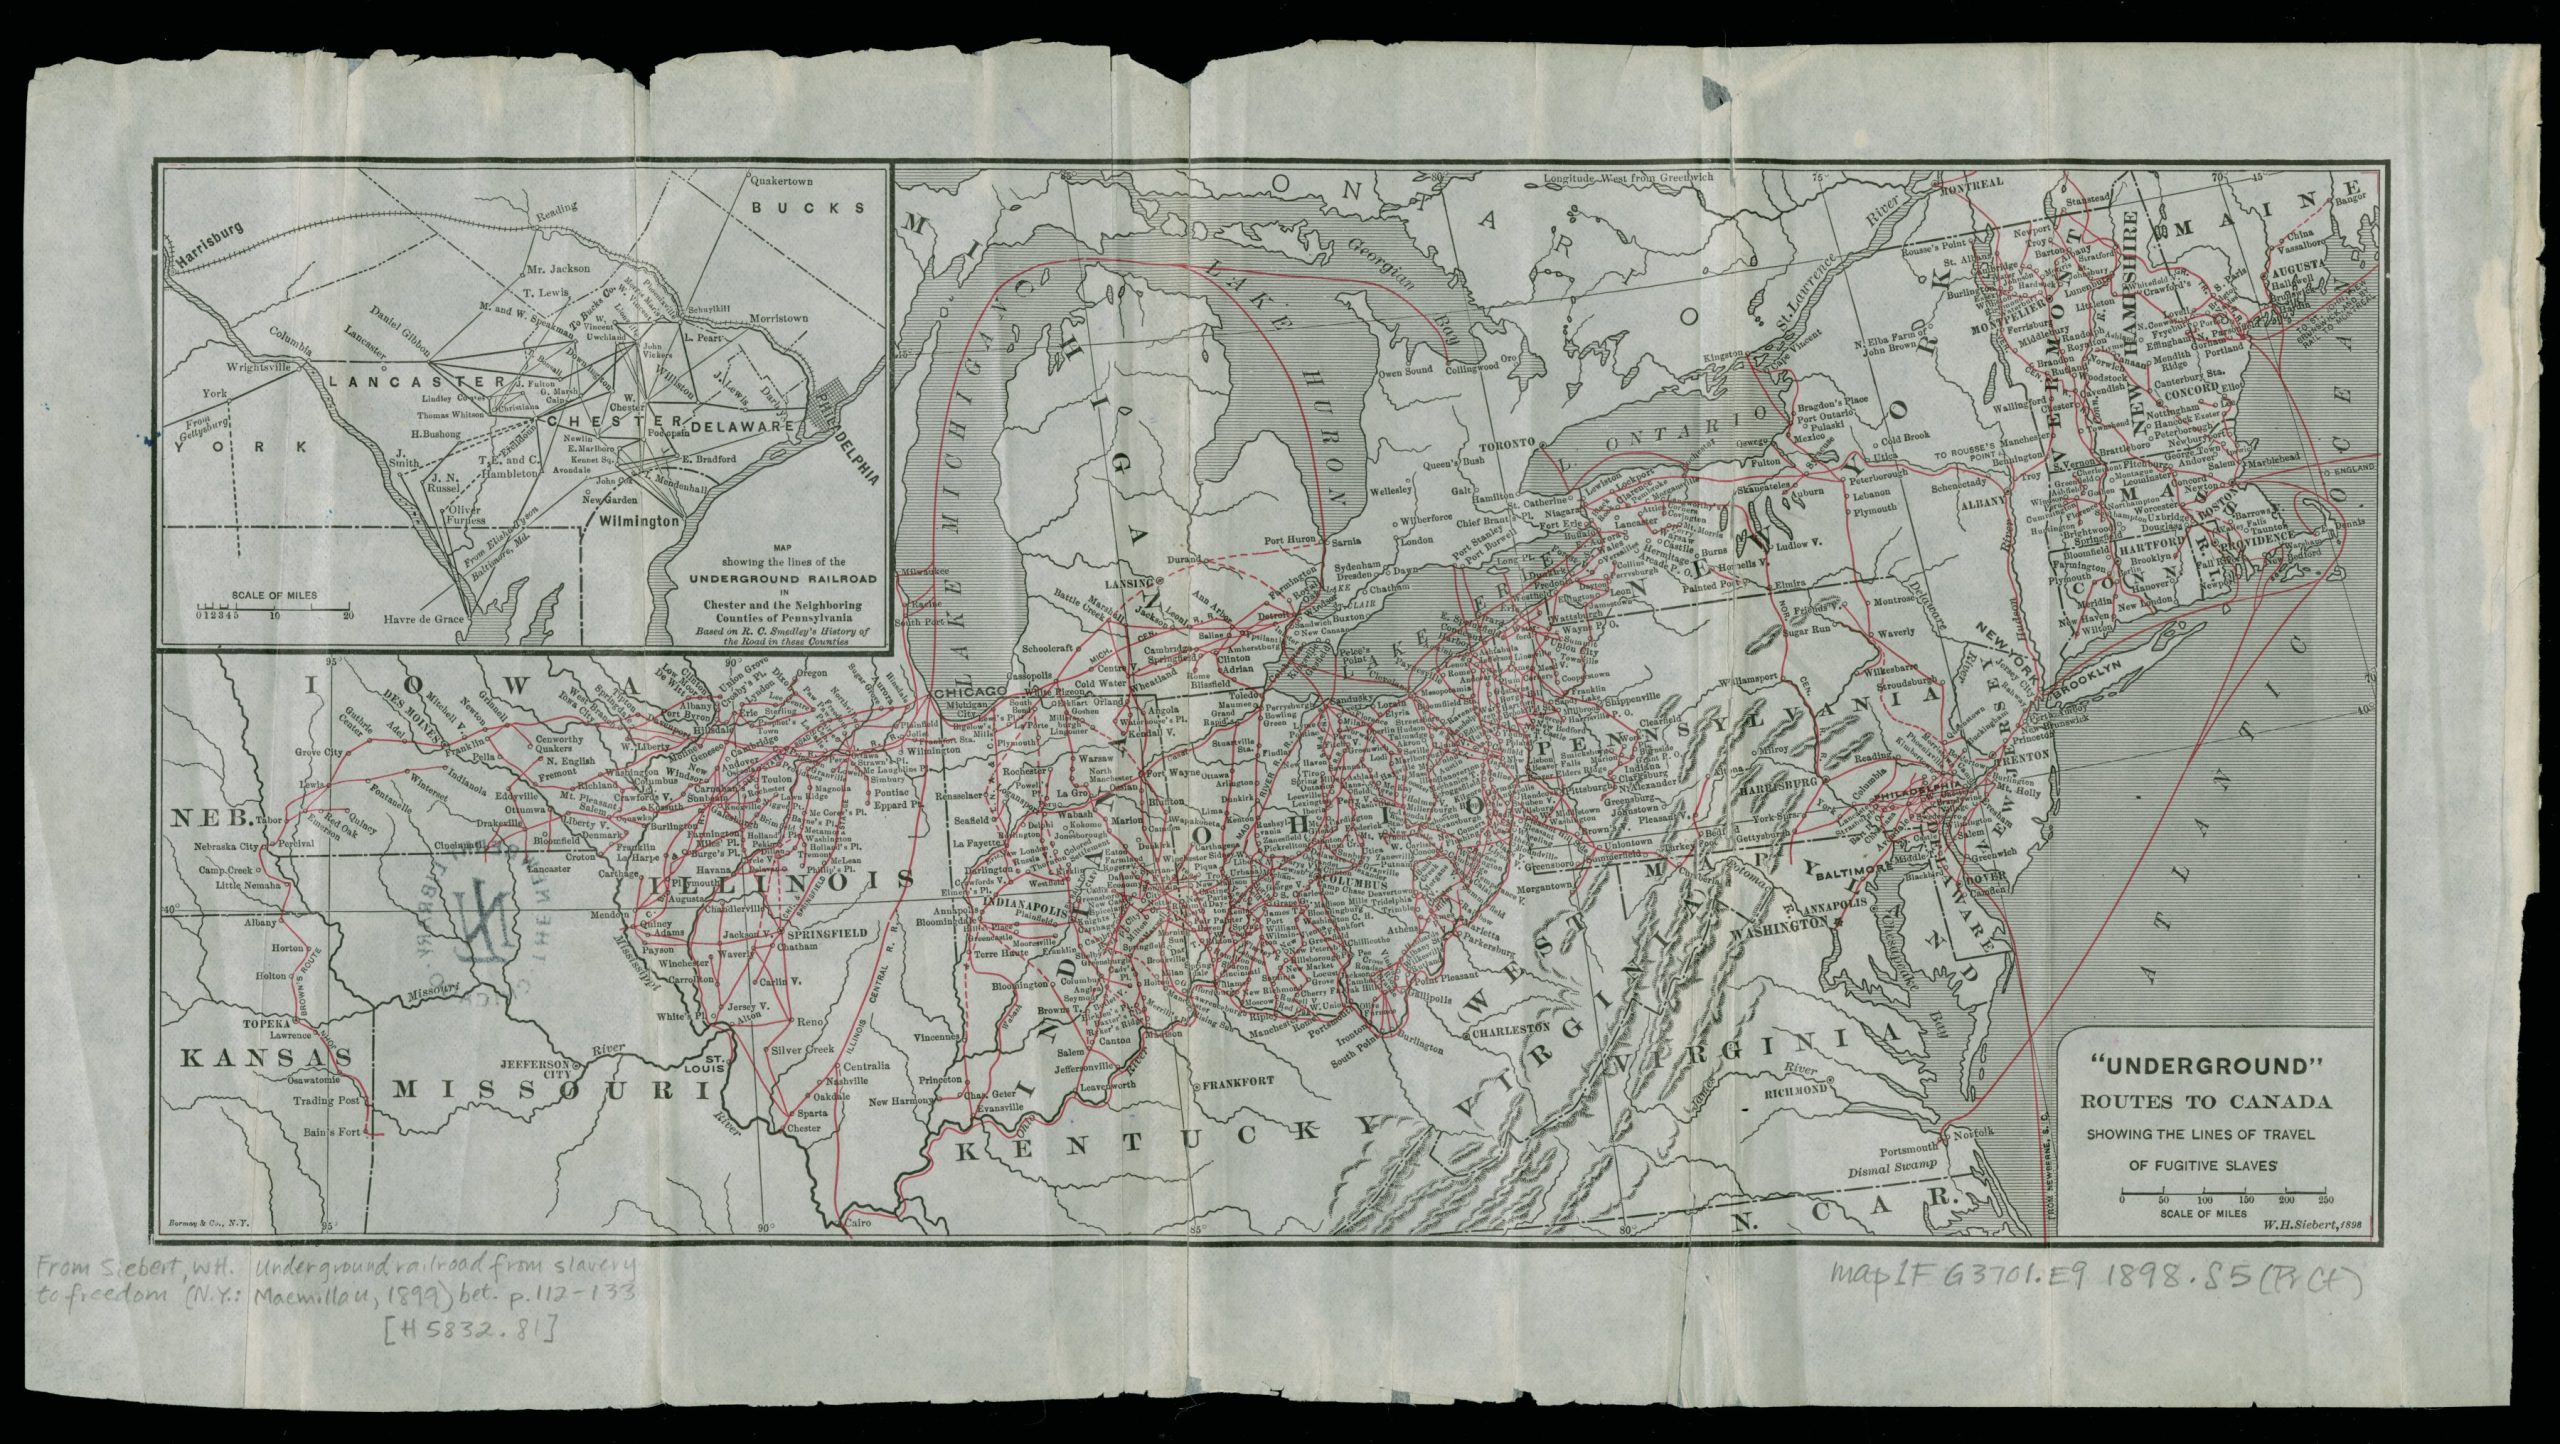 A printed map showing Underground Railroad routes used by fugitive slaves in the United States until 1865.; Roughly bounded by southern Ontario, Maine, Virginia, Iowa, and Lake Michigan